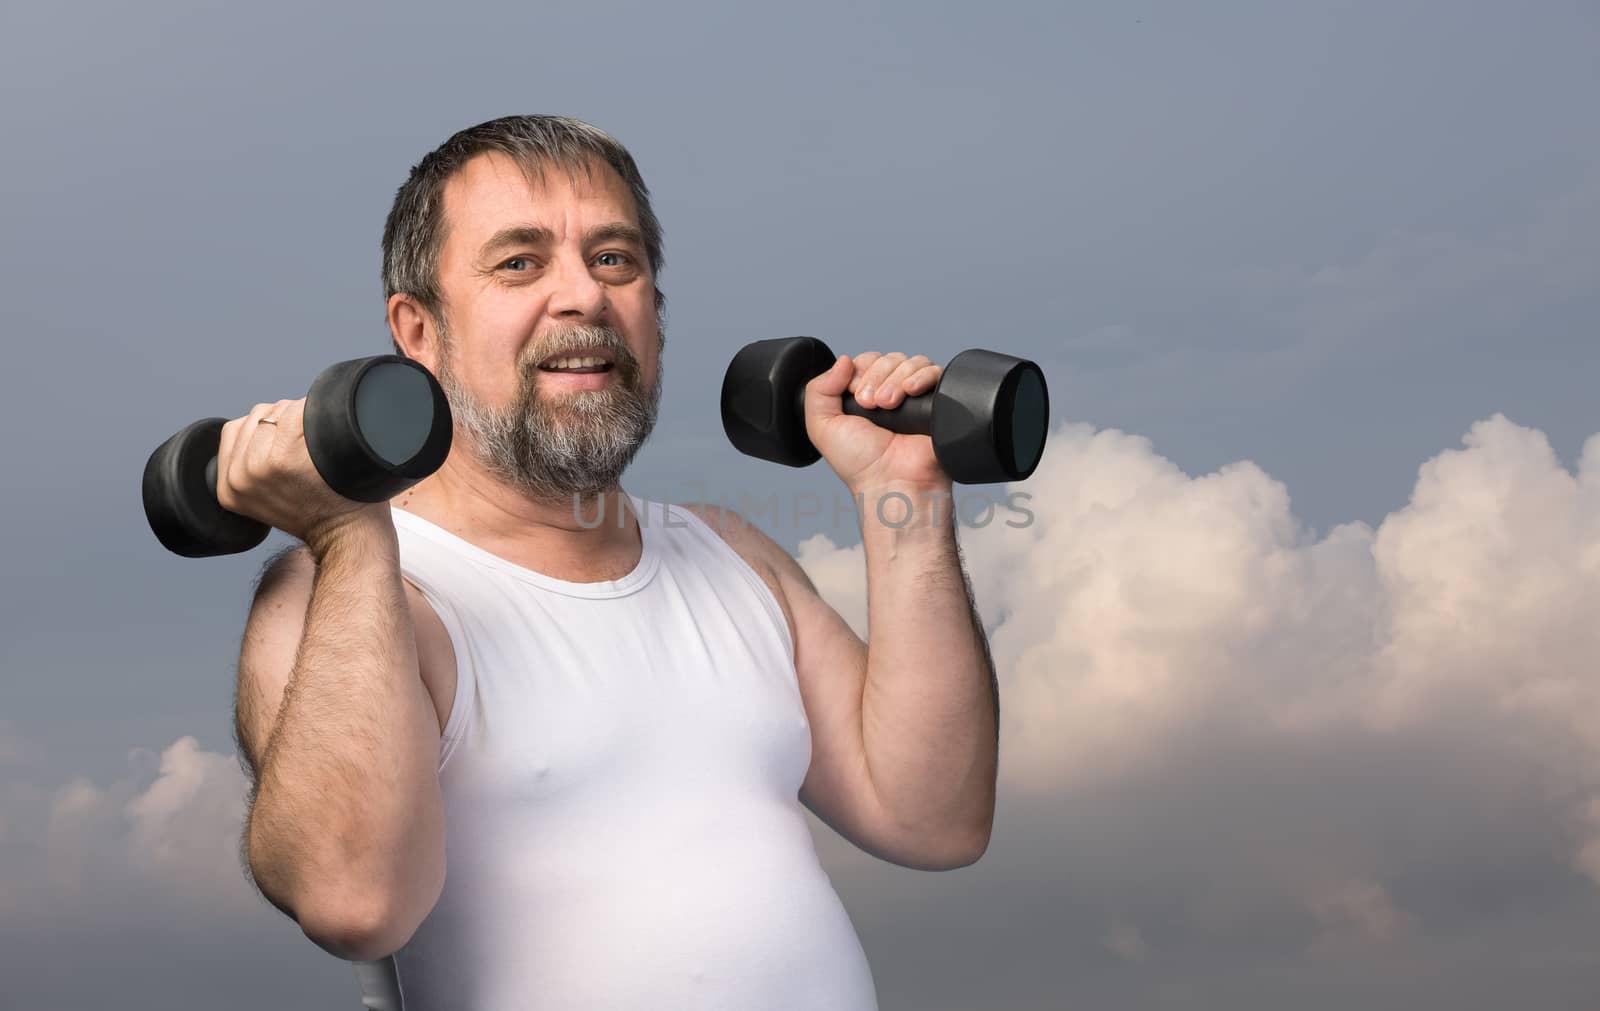 Elderly man exercising with dumbbells against cloudy sky background